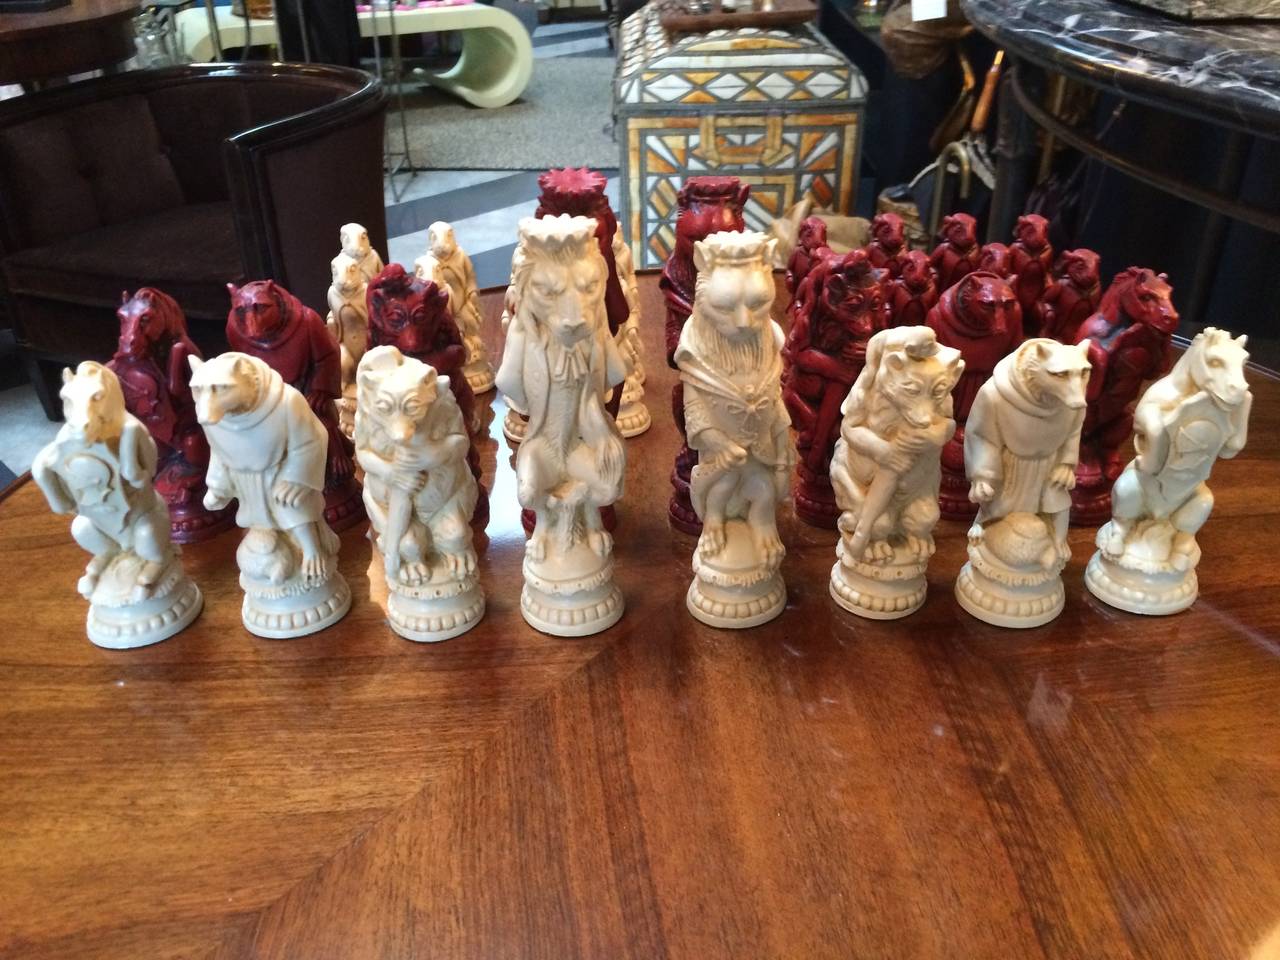 Wild animals play chess - beautiful and whimsical pieces for playing or viewing - Reynard - no board